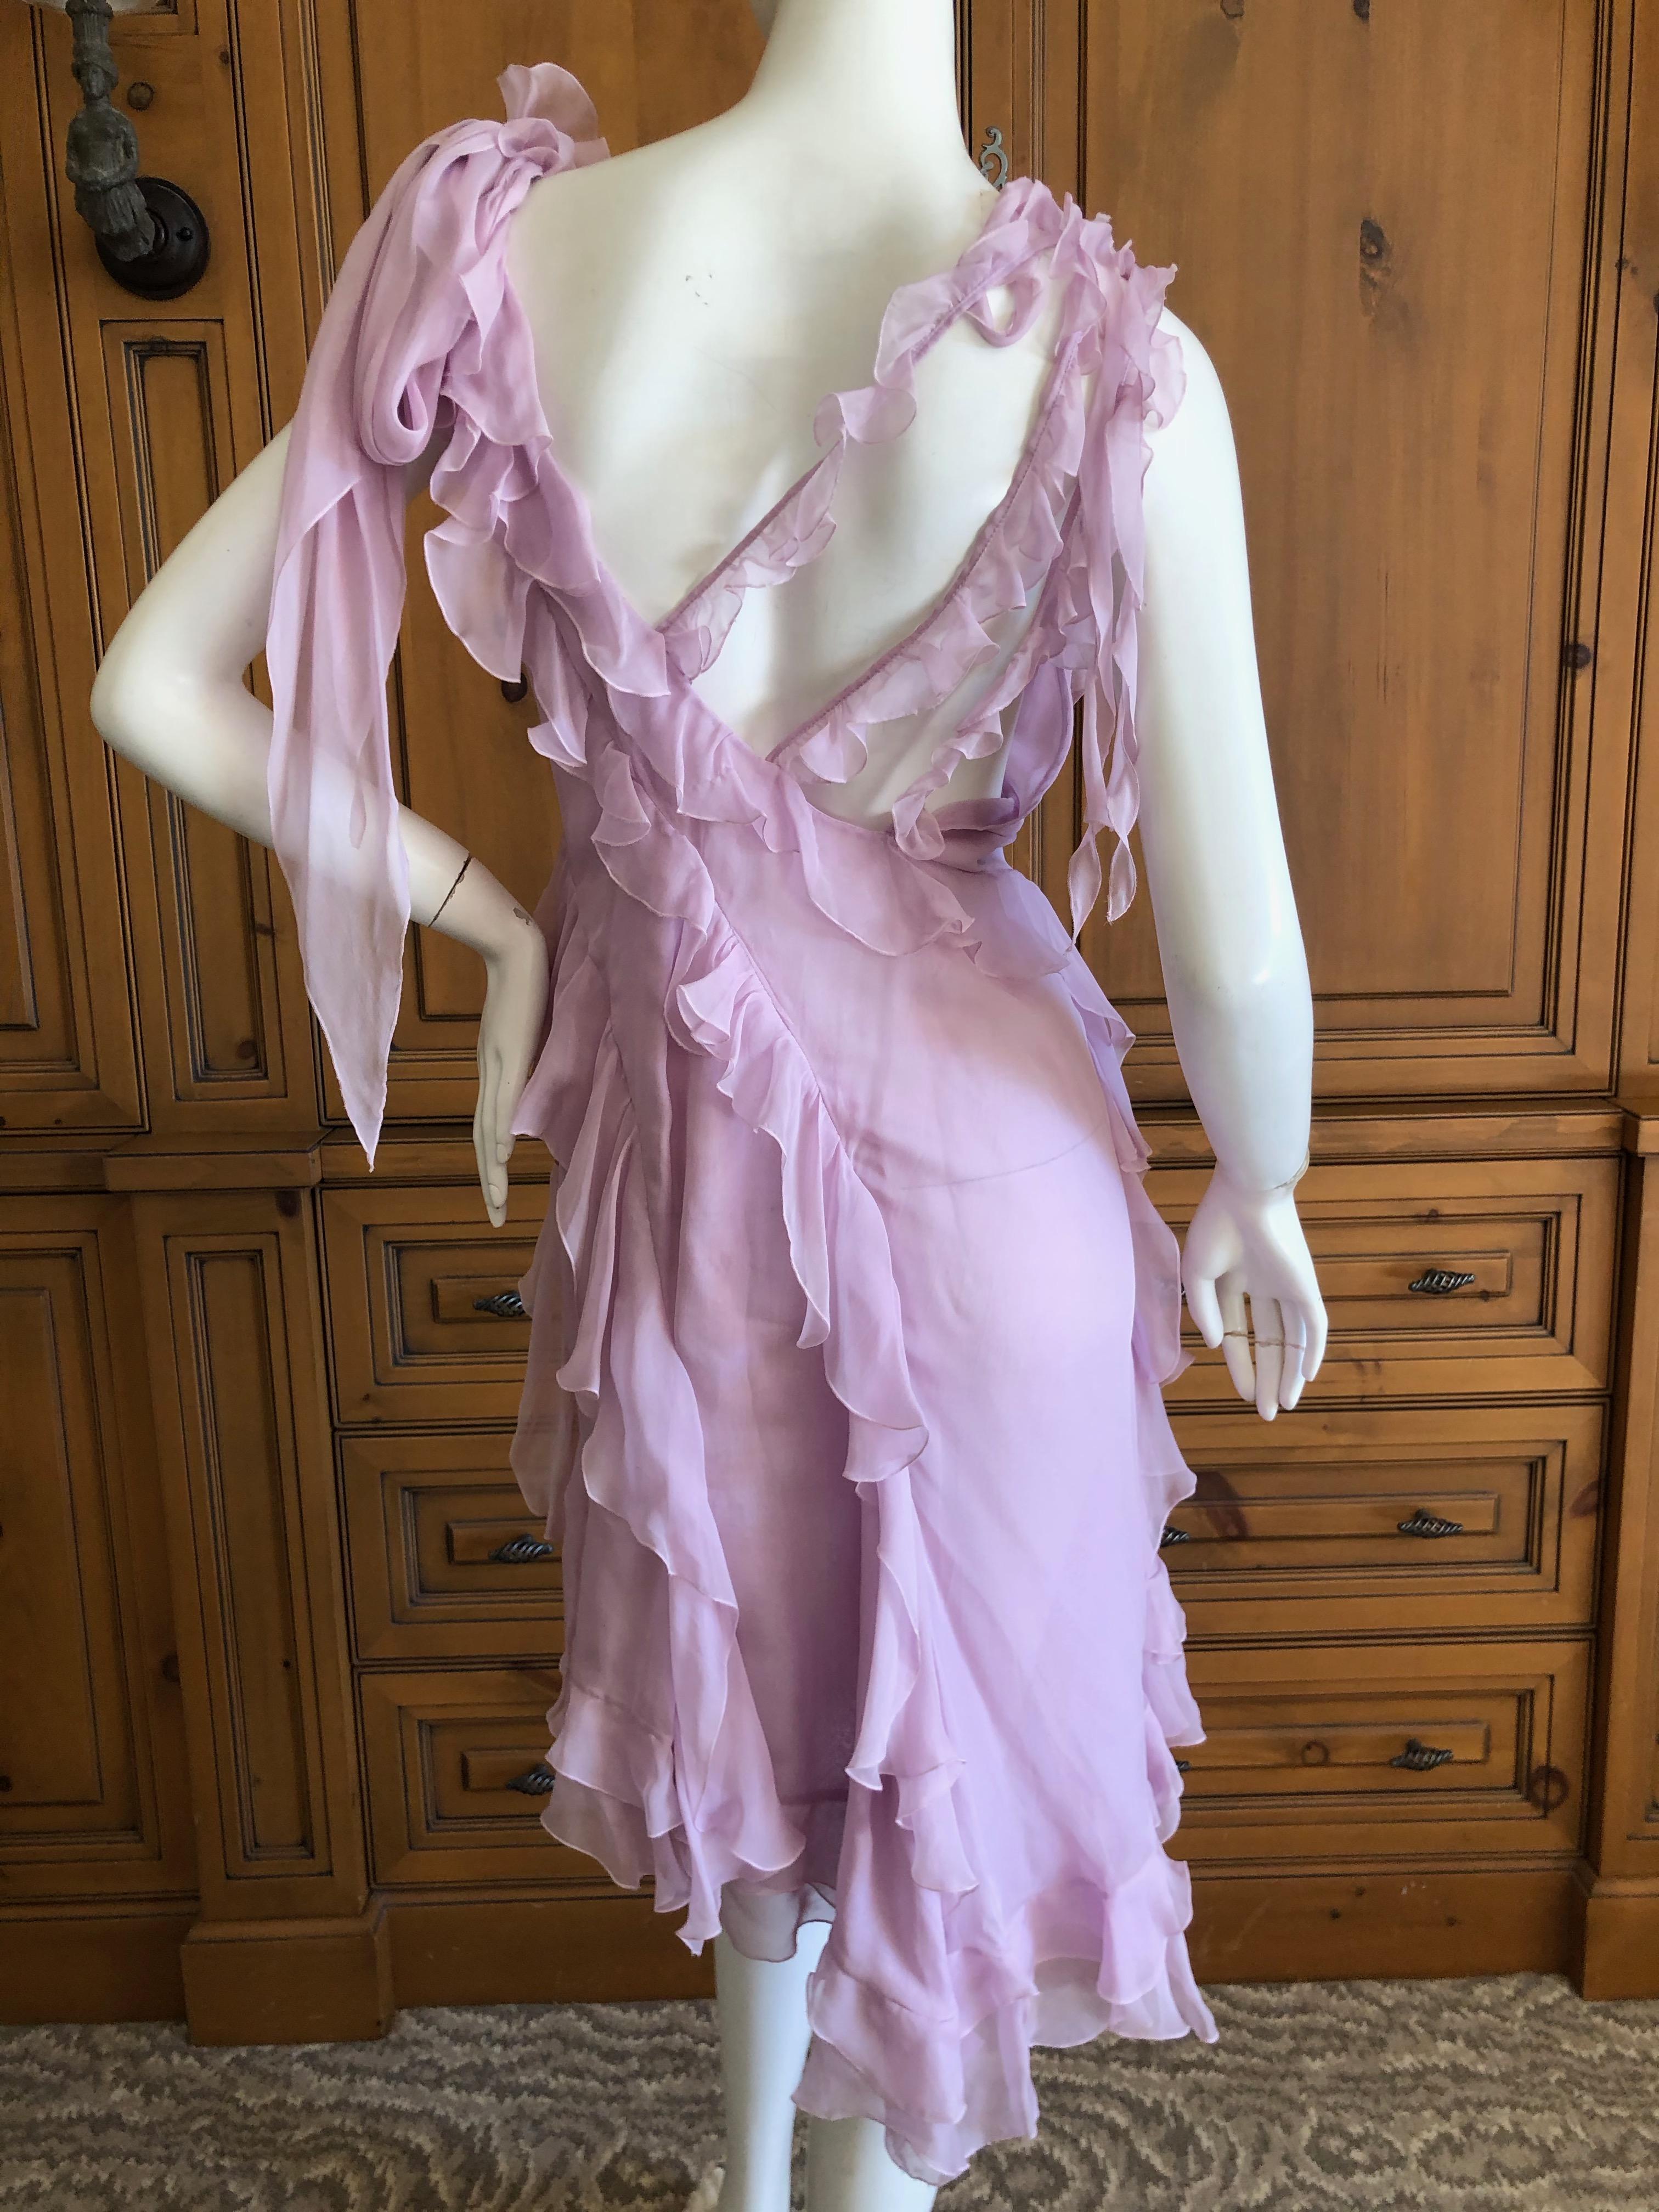 Versace Sweet Silk Chiffon Pink Ruffled Cocktail Dress from Spring 2004 In Excellent Condition For Sale In Cloverdale, CA